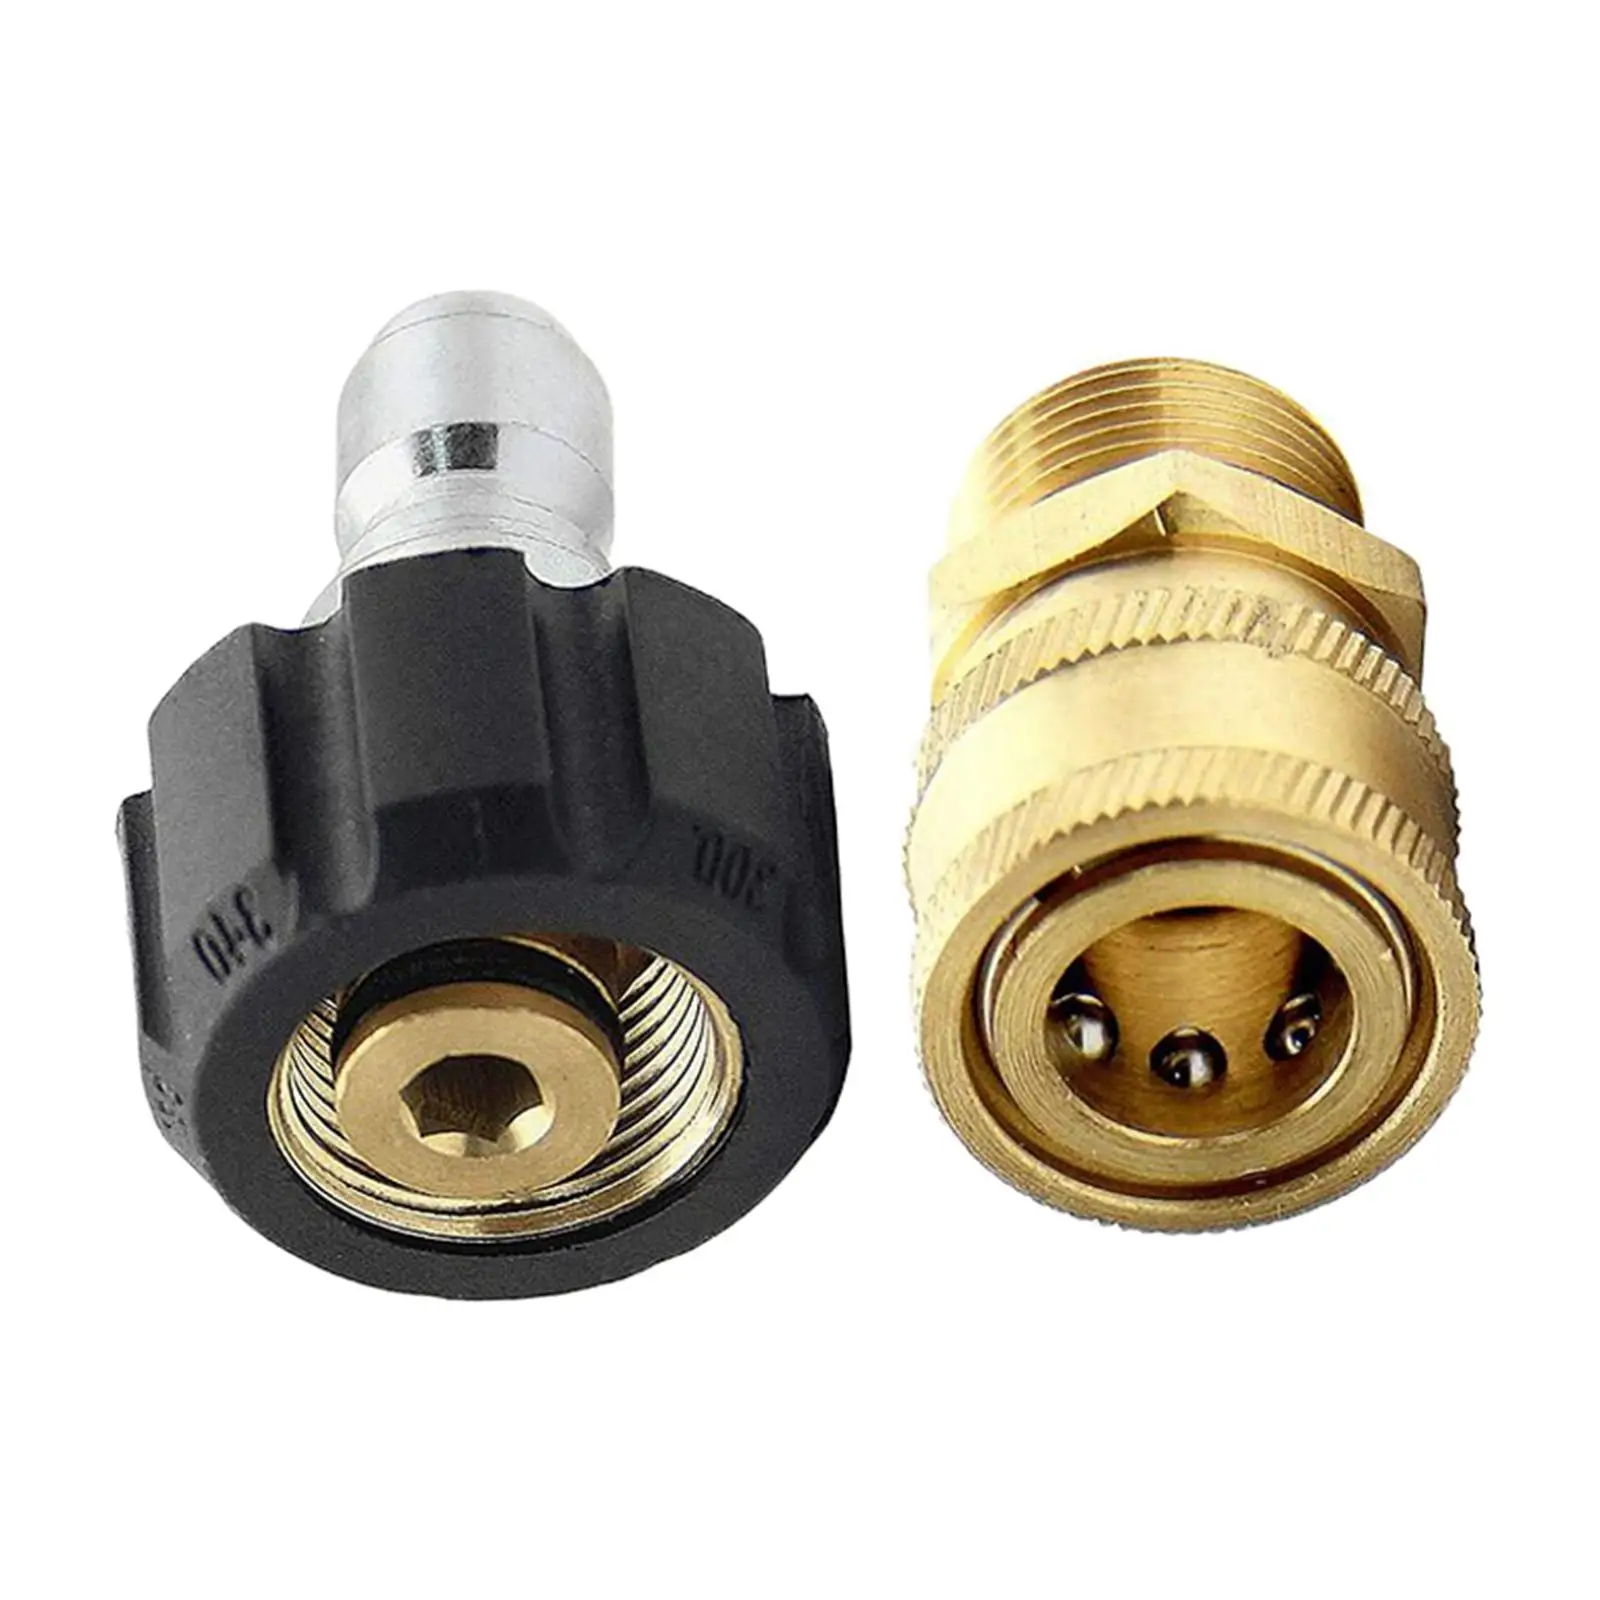 Pressure Washer Adapter M22 to 3/8 inch 5000PSI for Pump and Hose Connection